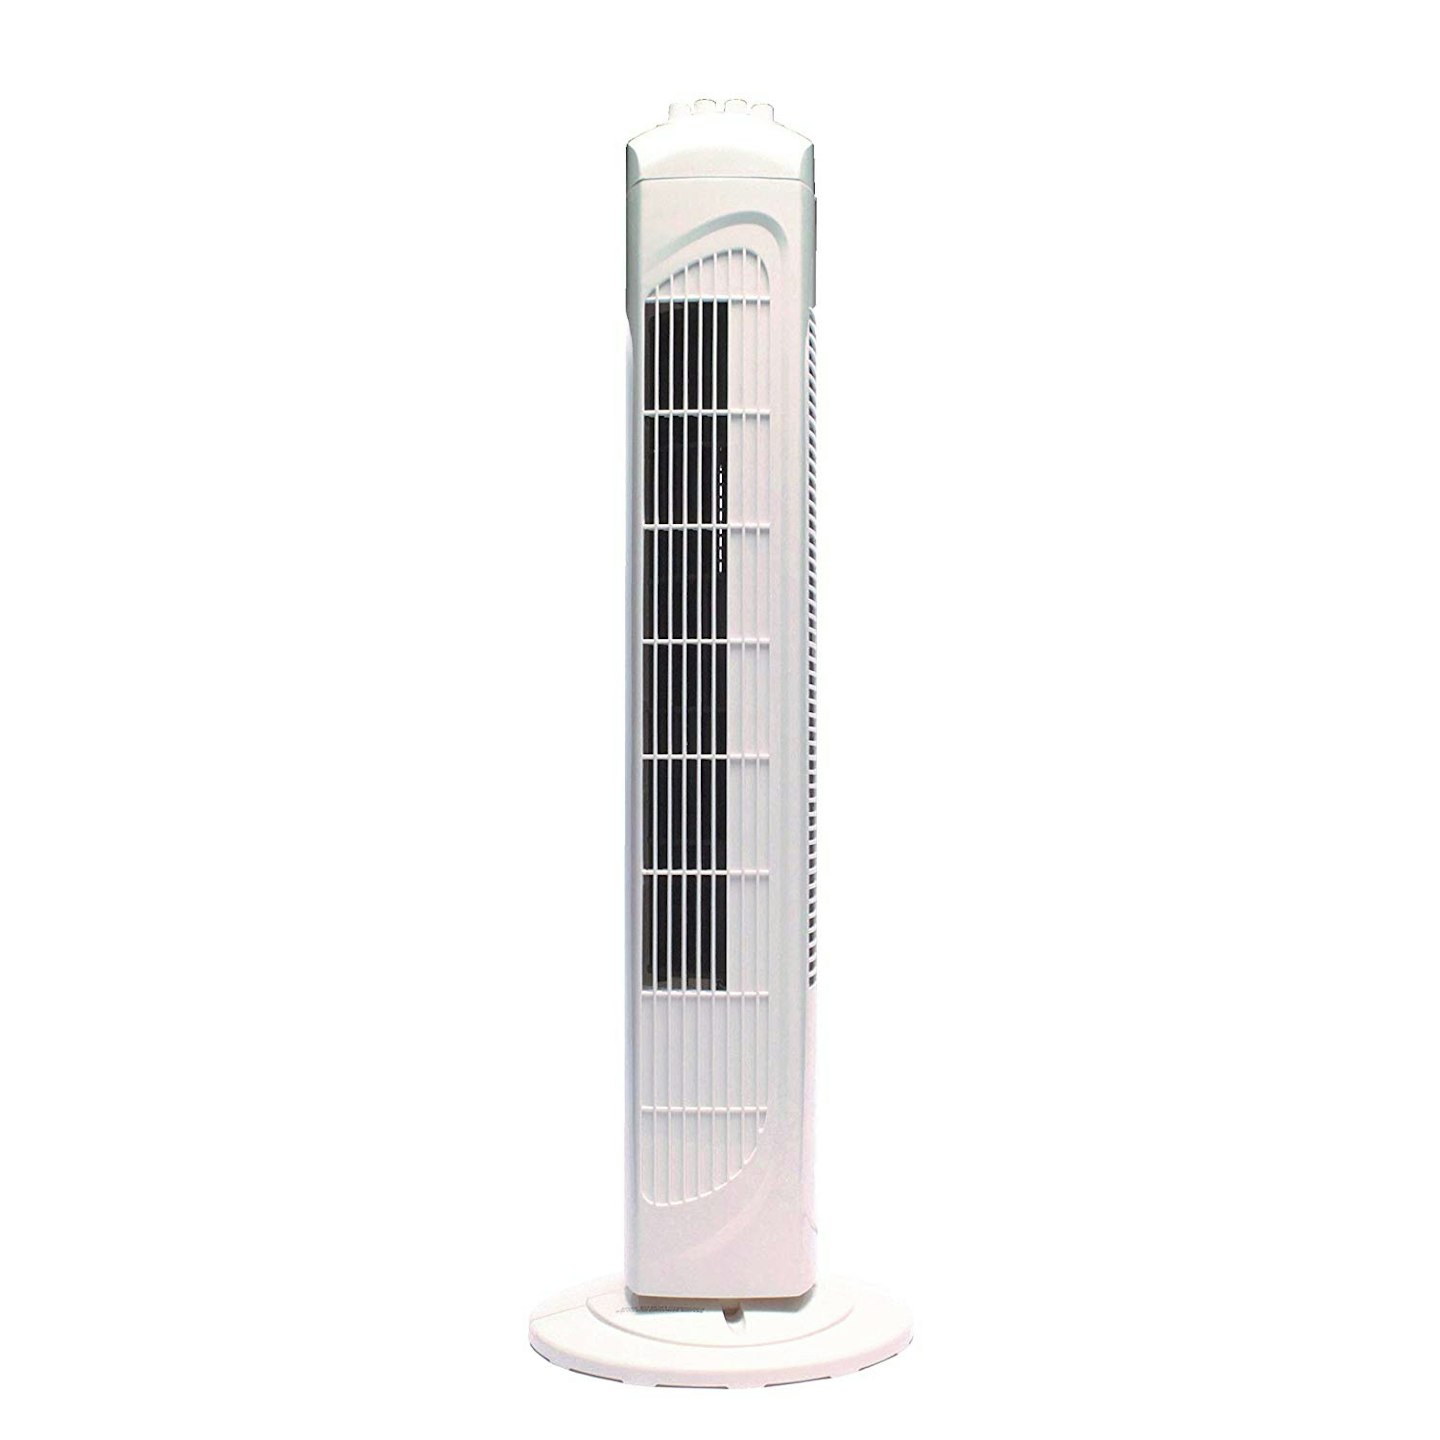 Q-Connect KF00407 Tower Fan 760 mm/30 Inch